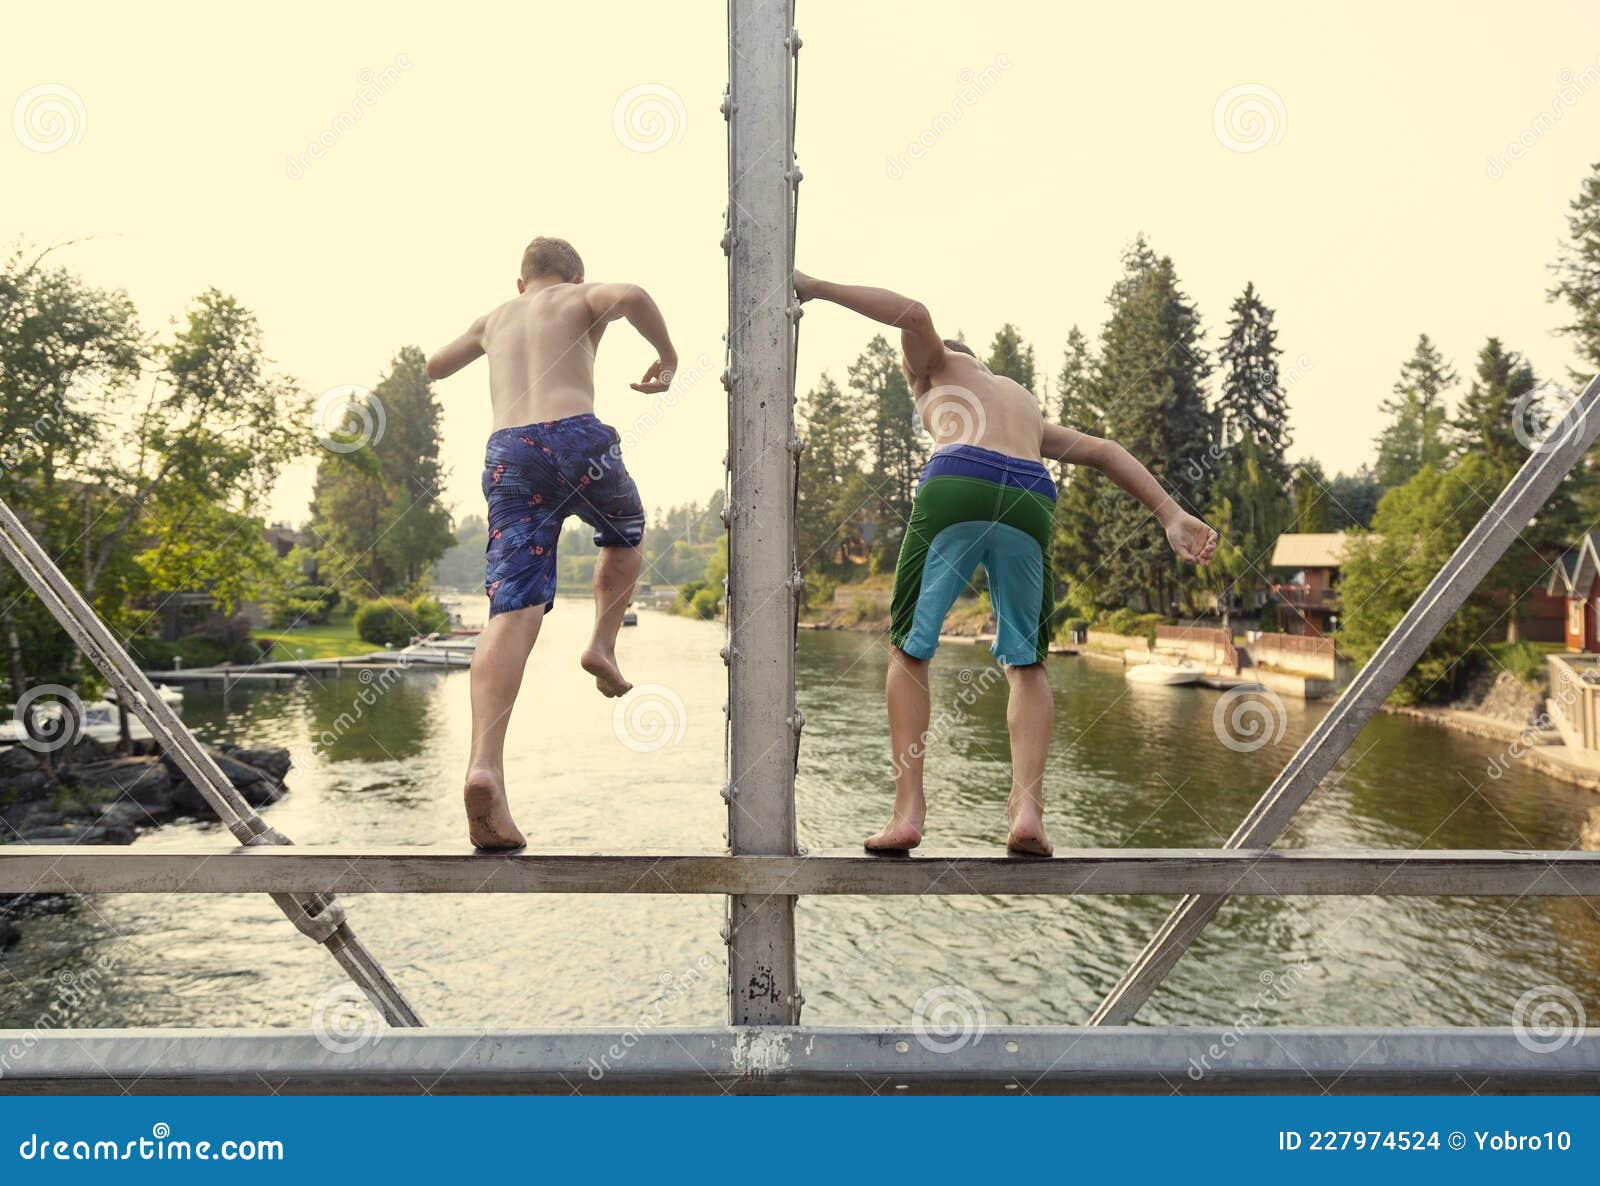 daring young boys jumping off a bridge into the river. view from behind.